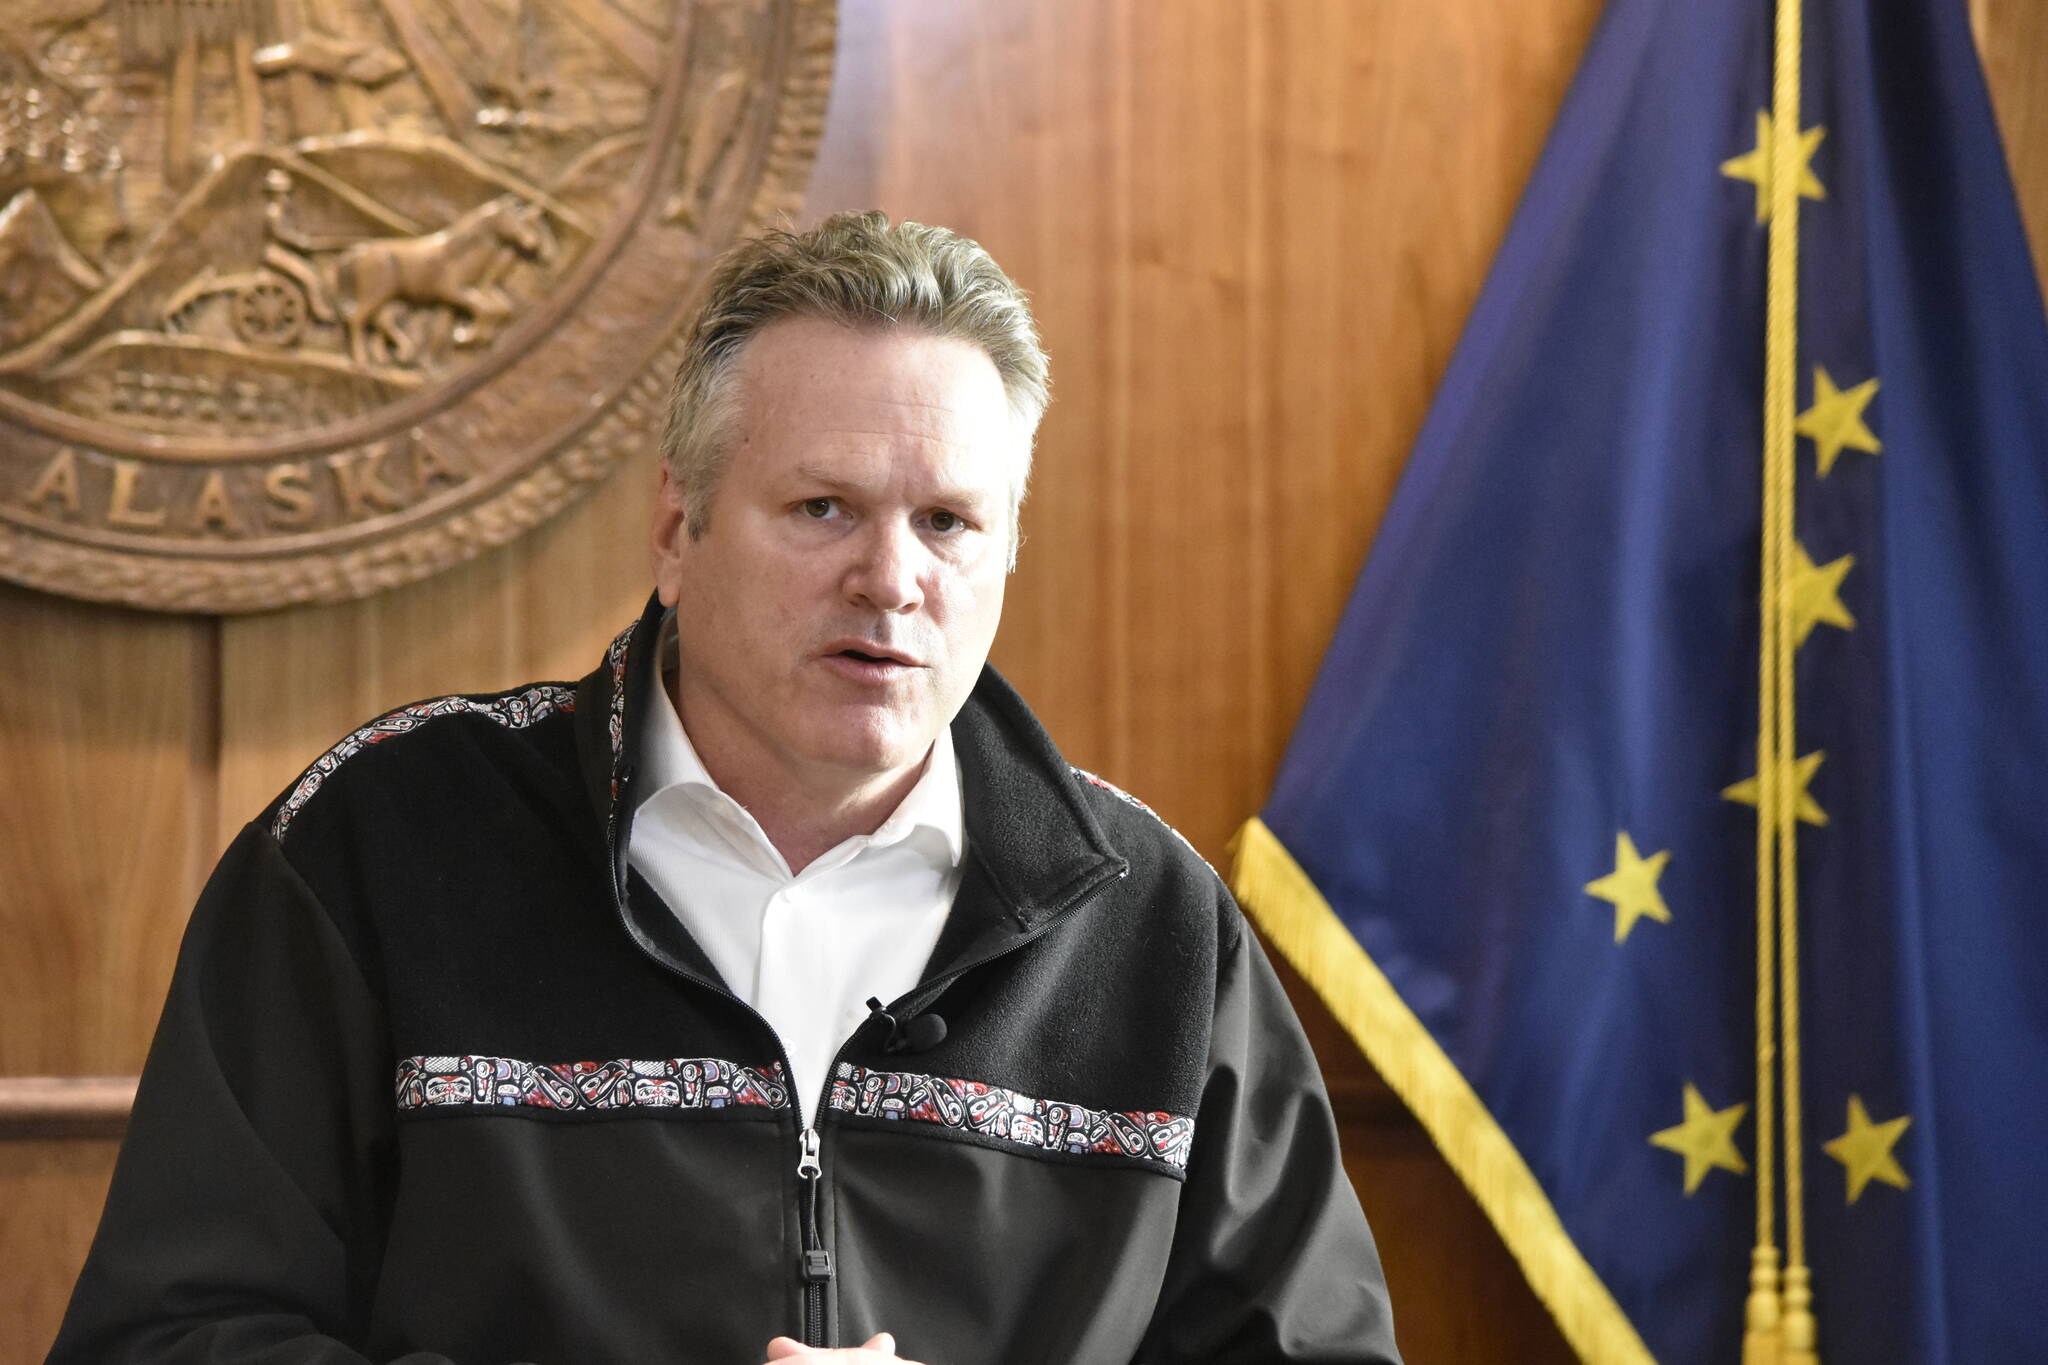 Gov. Mike Dunleavy speaks at a news conference at the Alaska State Capitol on Thursday, Oct. 28, 2021. (Peter Segall / Juneau Empire)